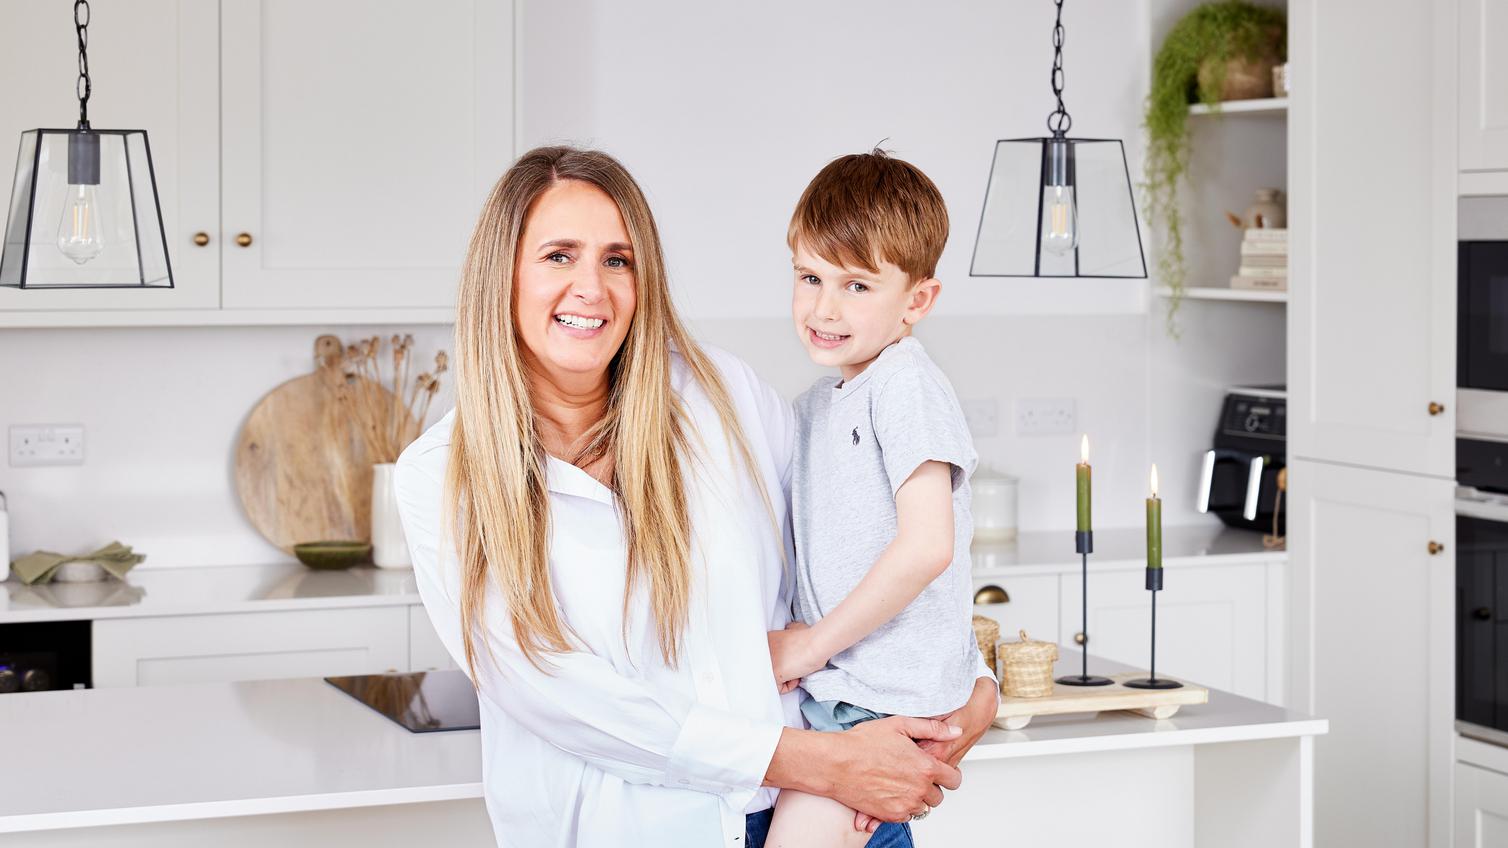 Serena and her son preparing a meal together on their white Howdens island worktop